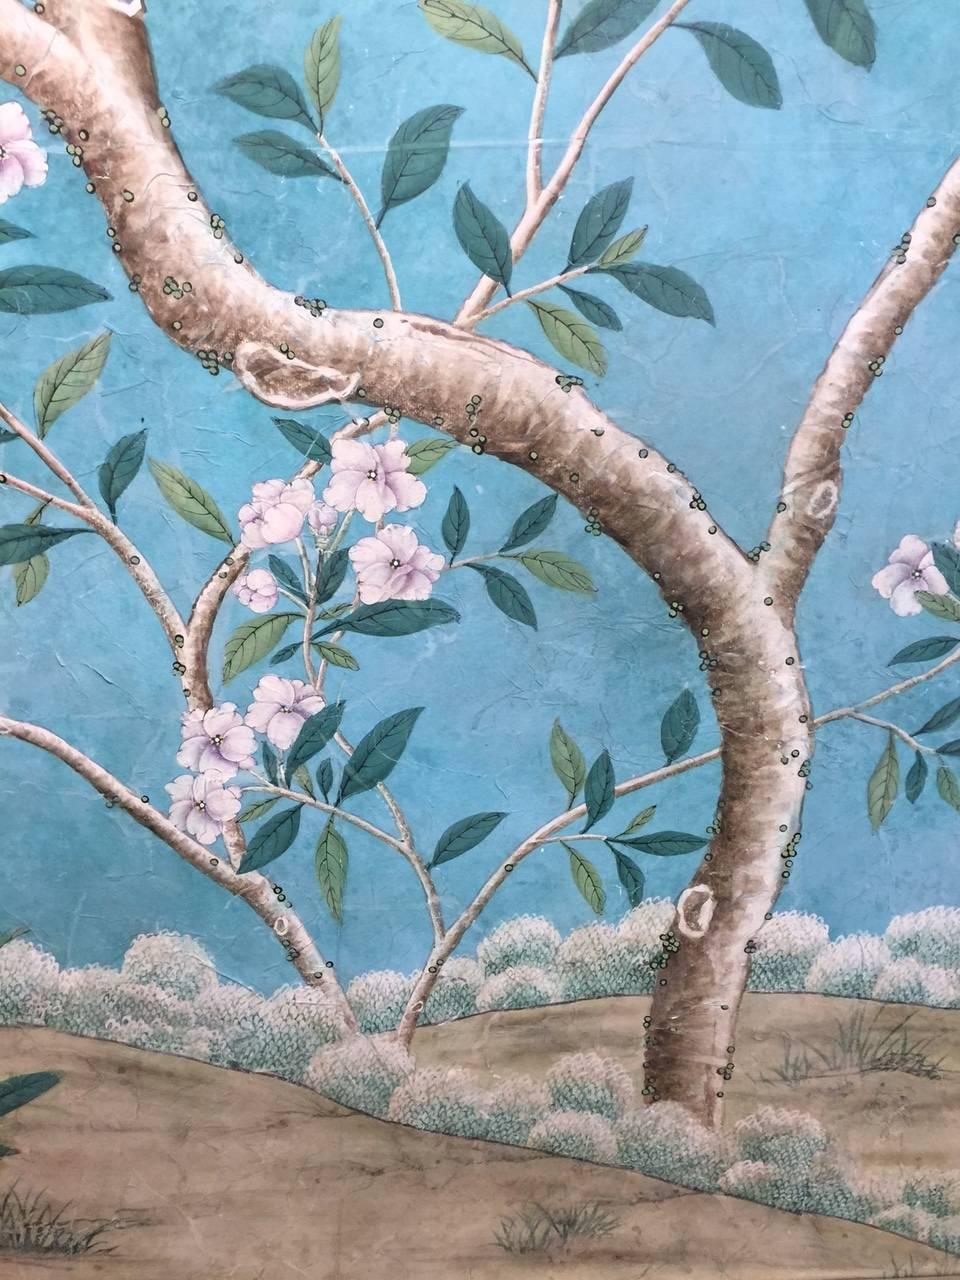 A beautiful section of hand-painted Gracie wallpaper. This was antiqued to look like a restored piece of 18th century Chinese scenic wallpaper.

This was hand-painted about five years ago, and recently framed.

Design is of a flowering tree,